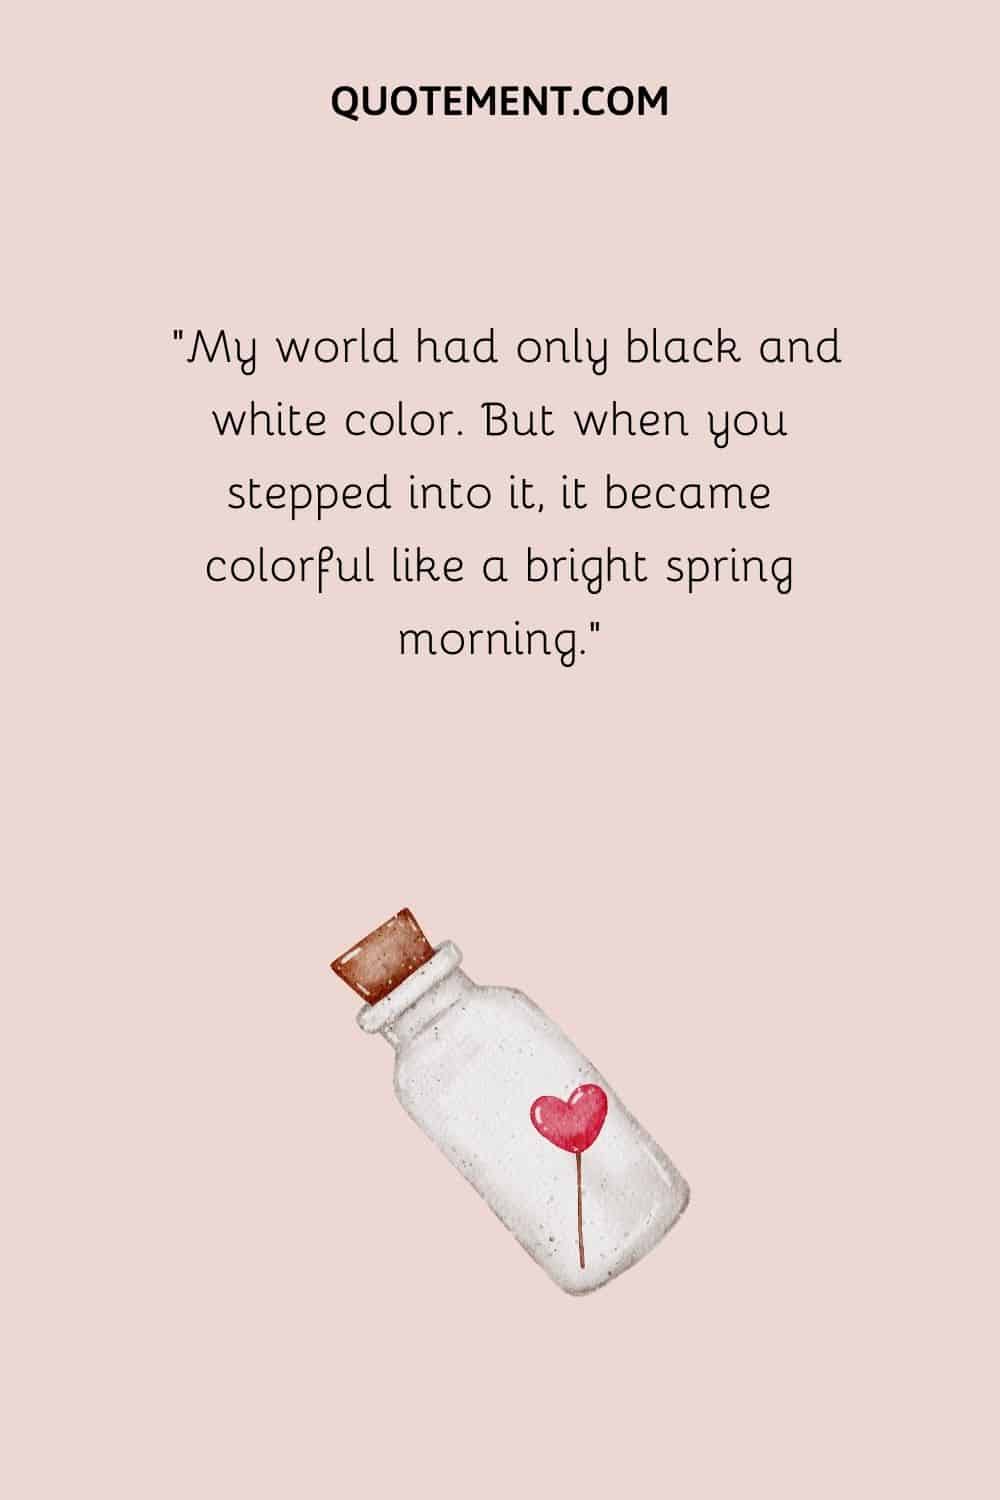 My world had only black and white color. But when you stepped into it, it became colorful like a bright spring morning.